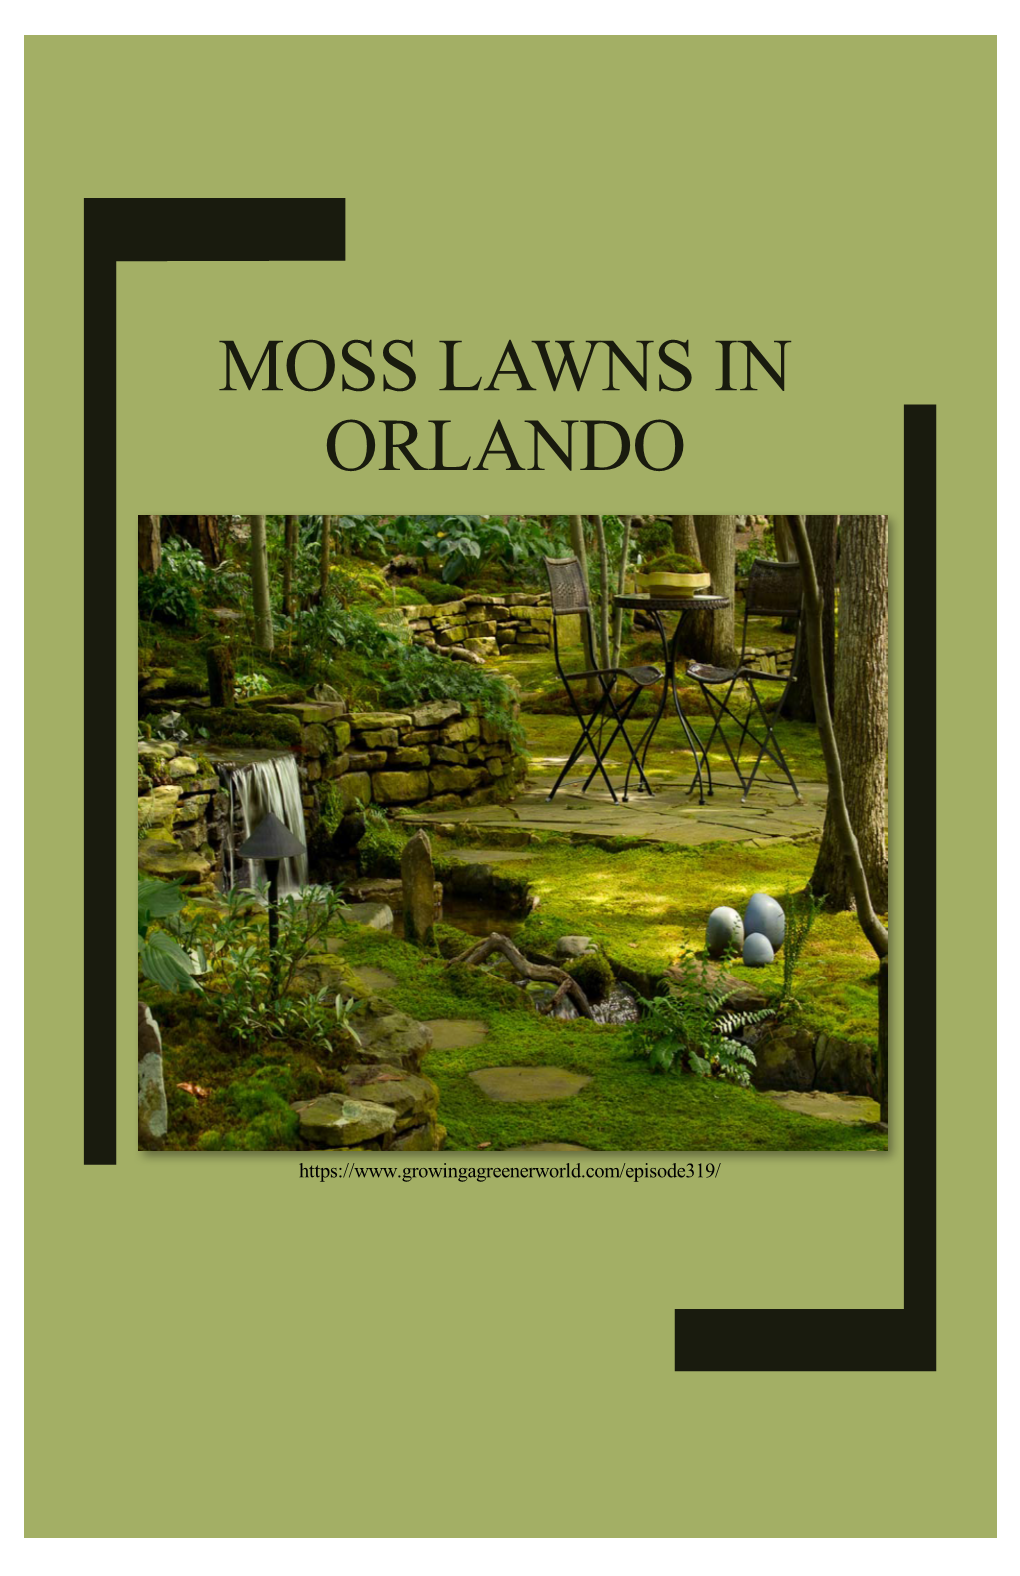 Moss Lawns in Orlando Final Booklet 2 28